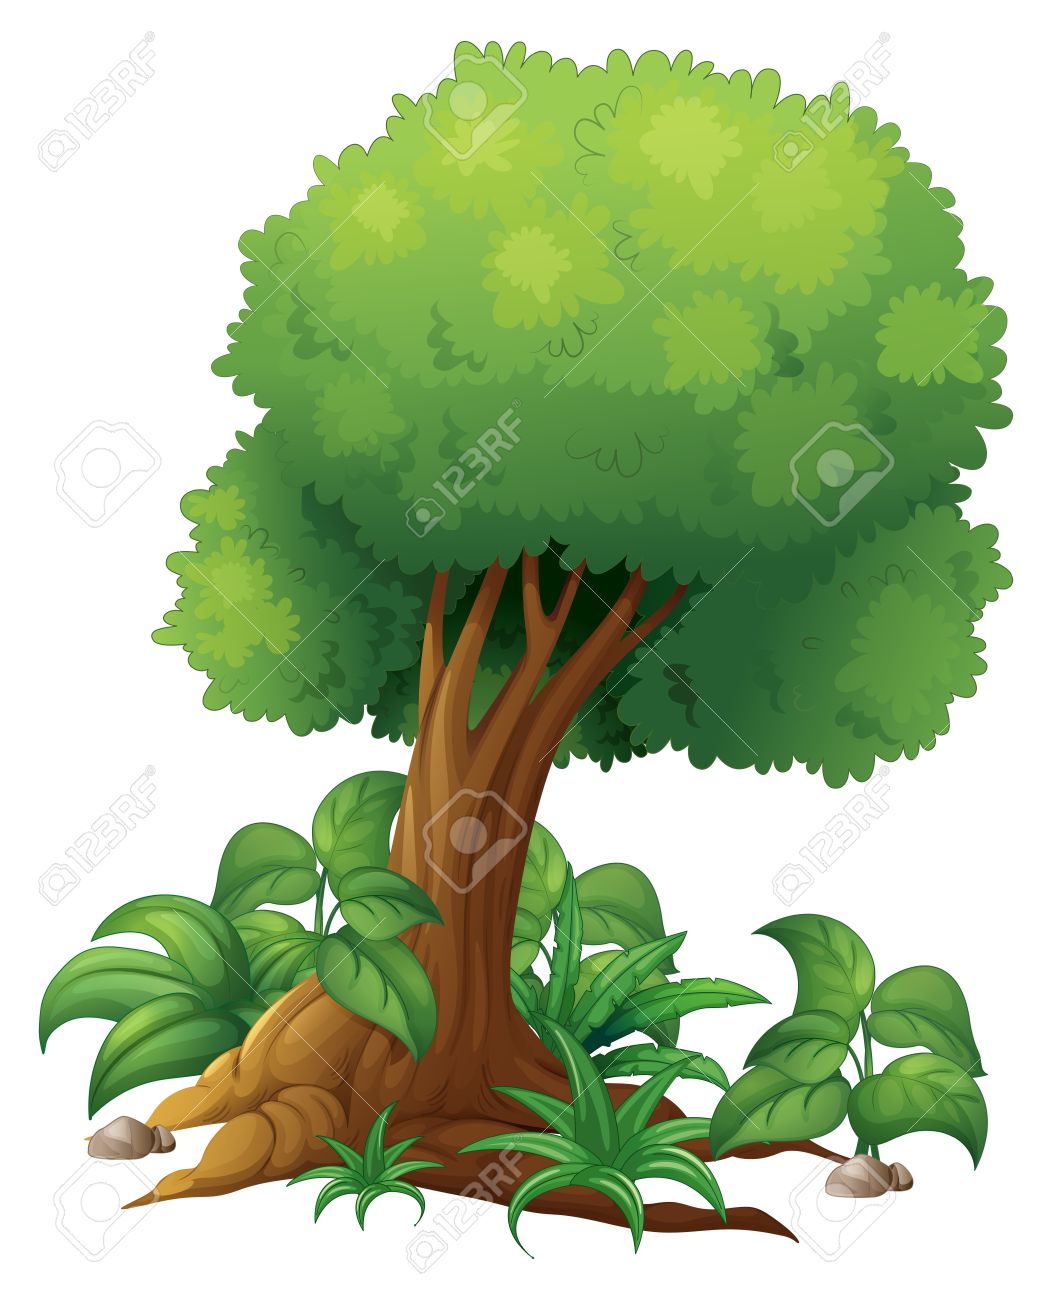 Shrub clipart #1, Download drawings